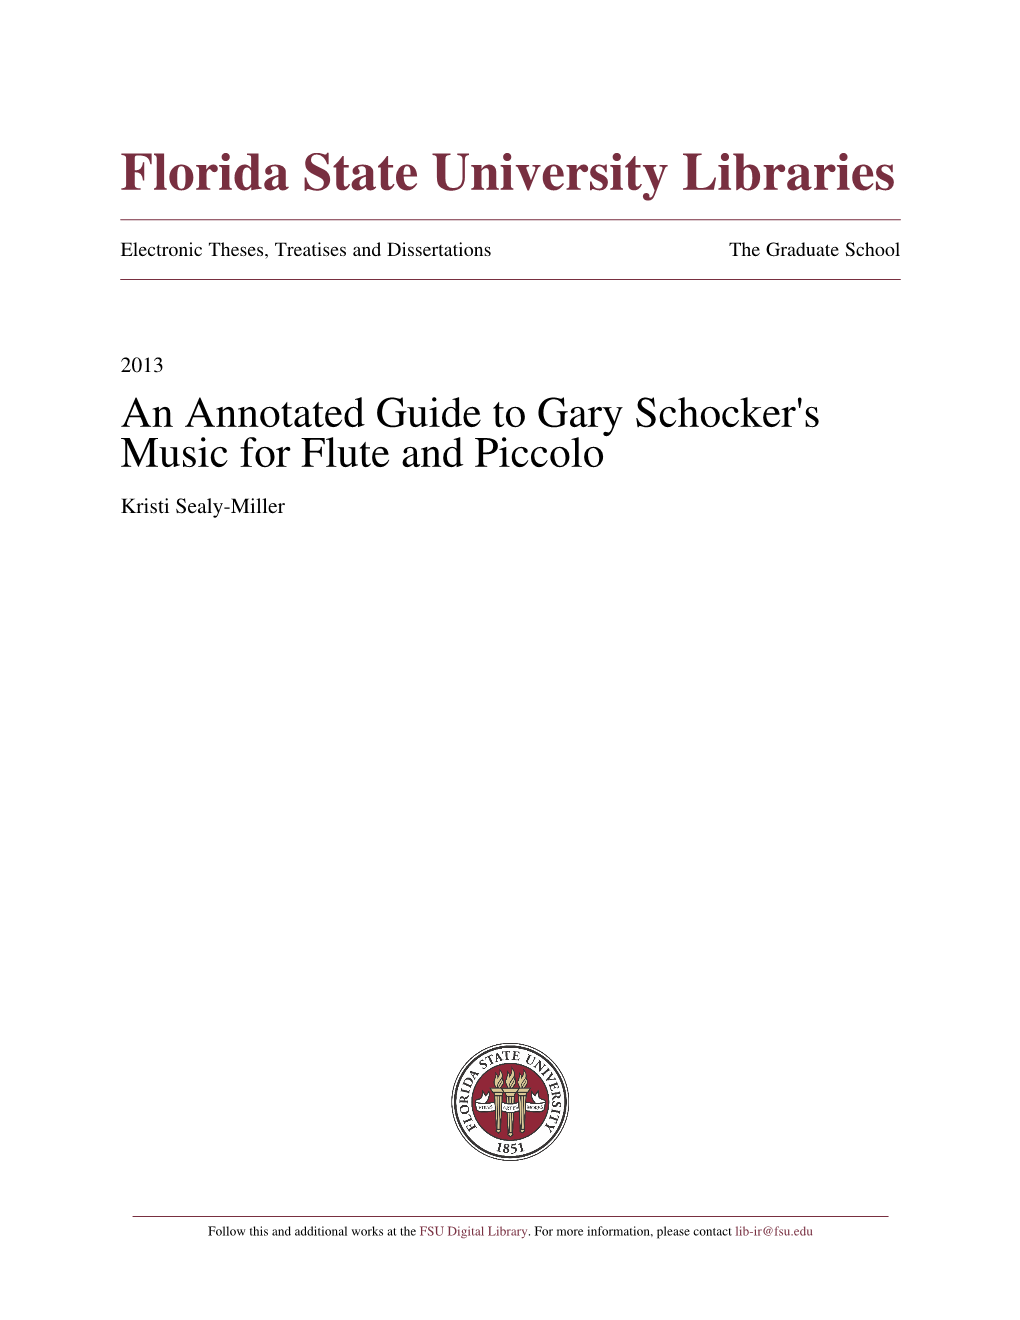 An Annotated Guide to Gary Schocker's Music for Flute and Piccolo Kristi Sealy-Miller